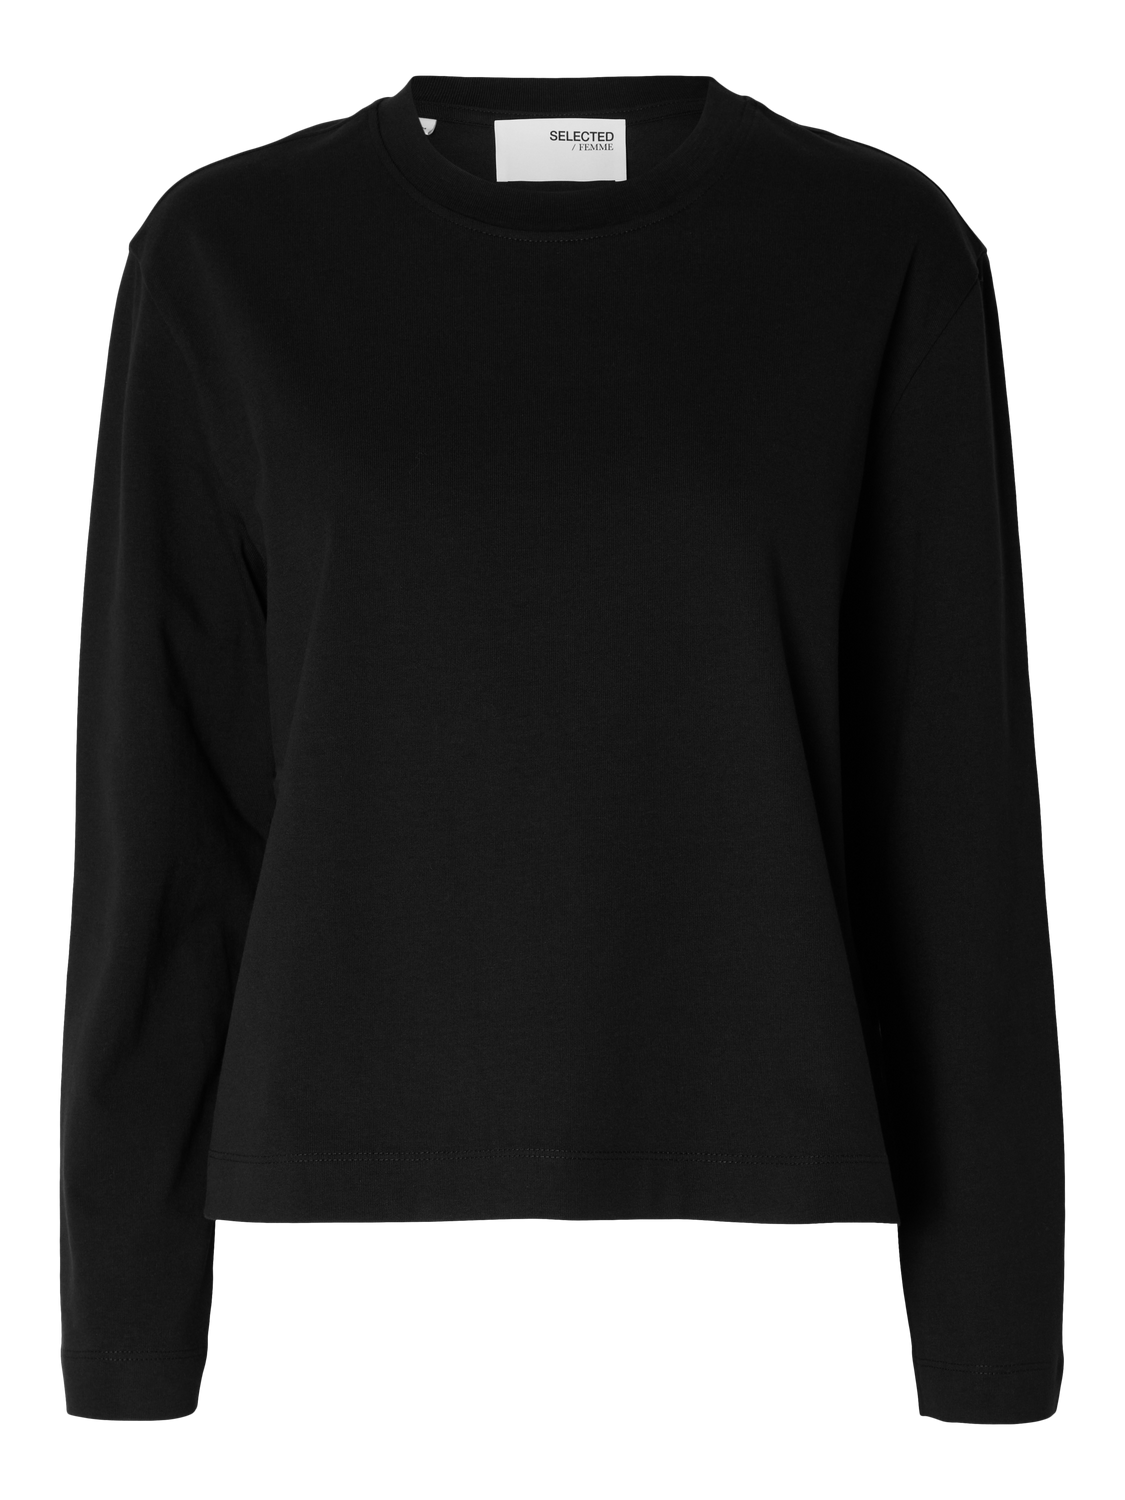 SELECTED FEMME - ESSENTIAL LS BOXY T-Shirt - Black